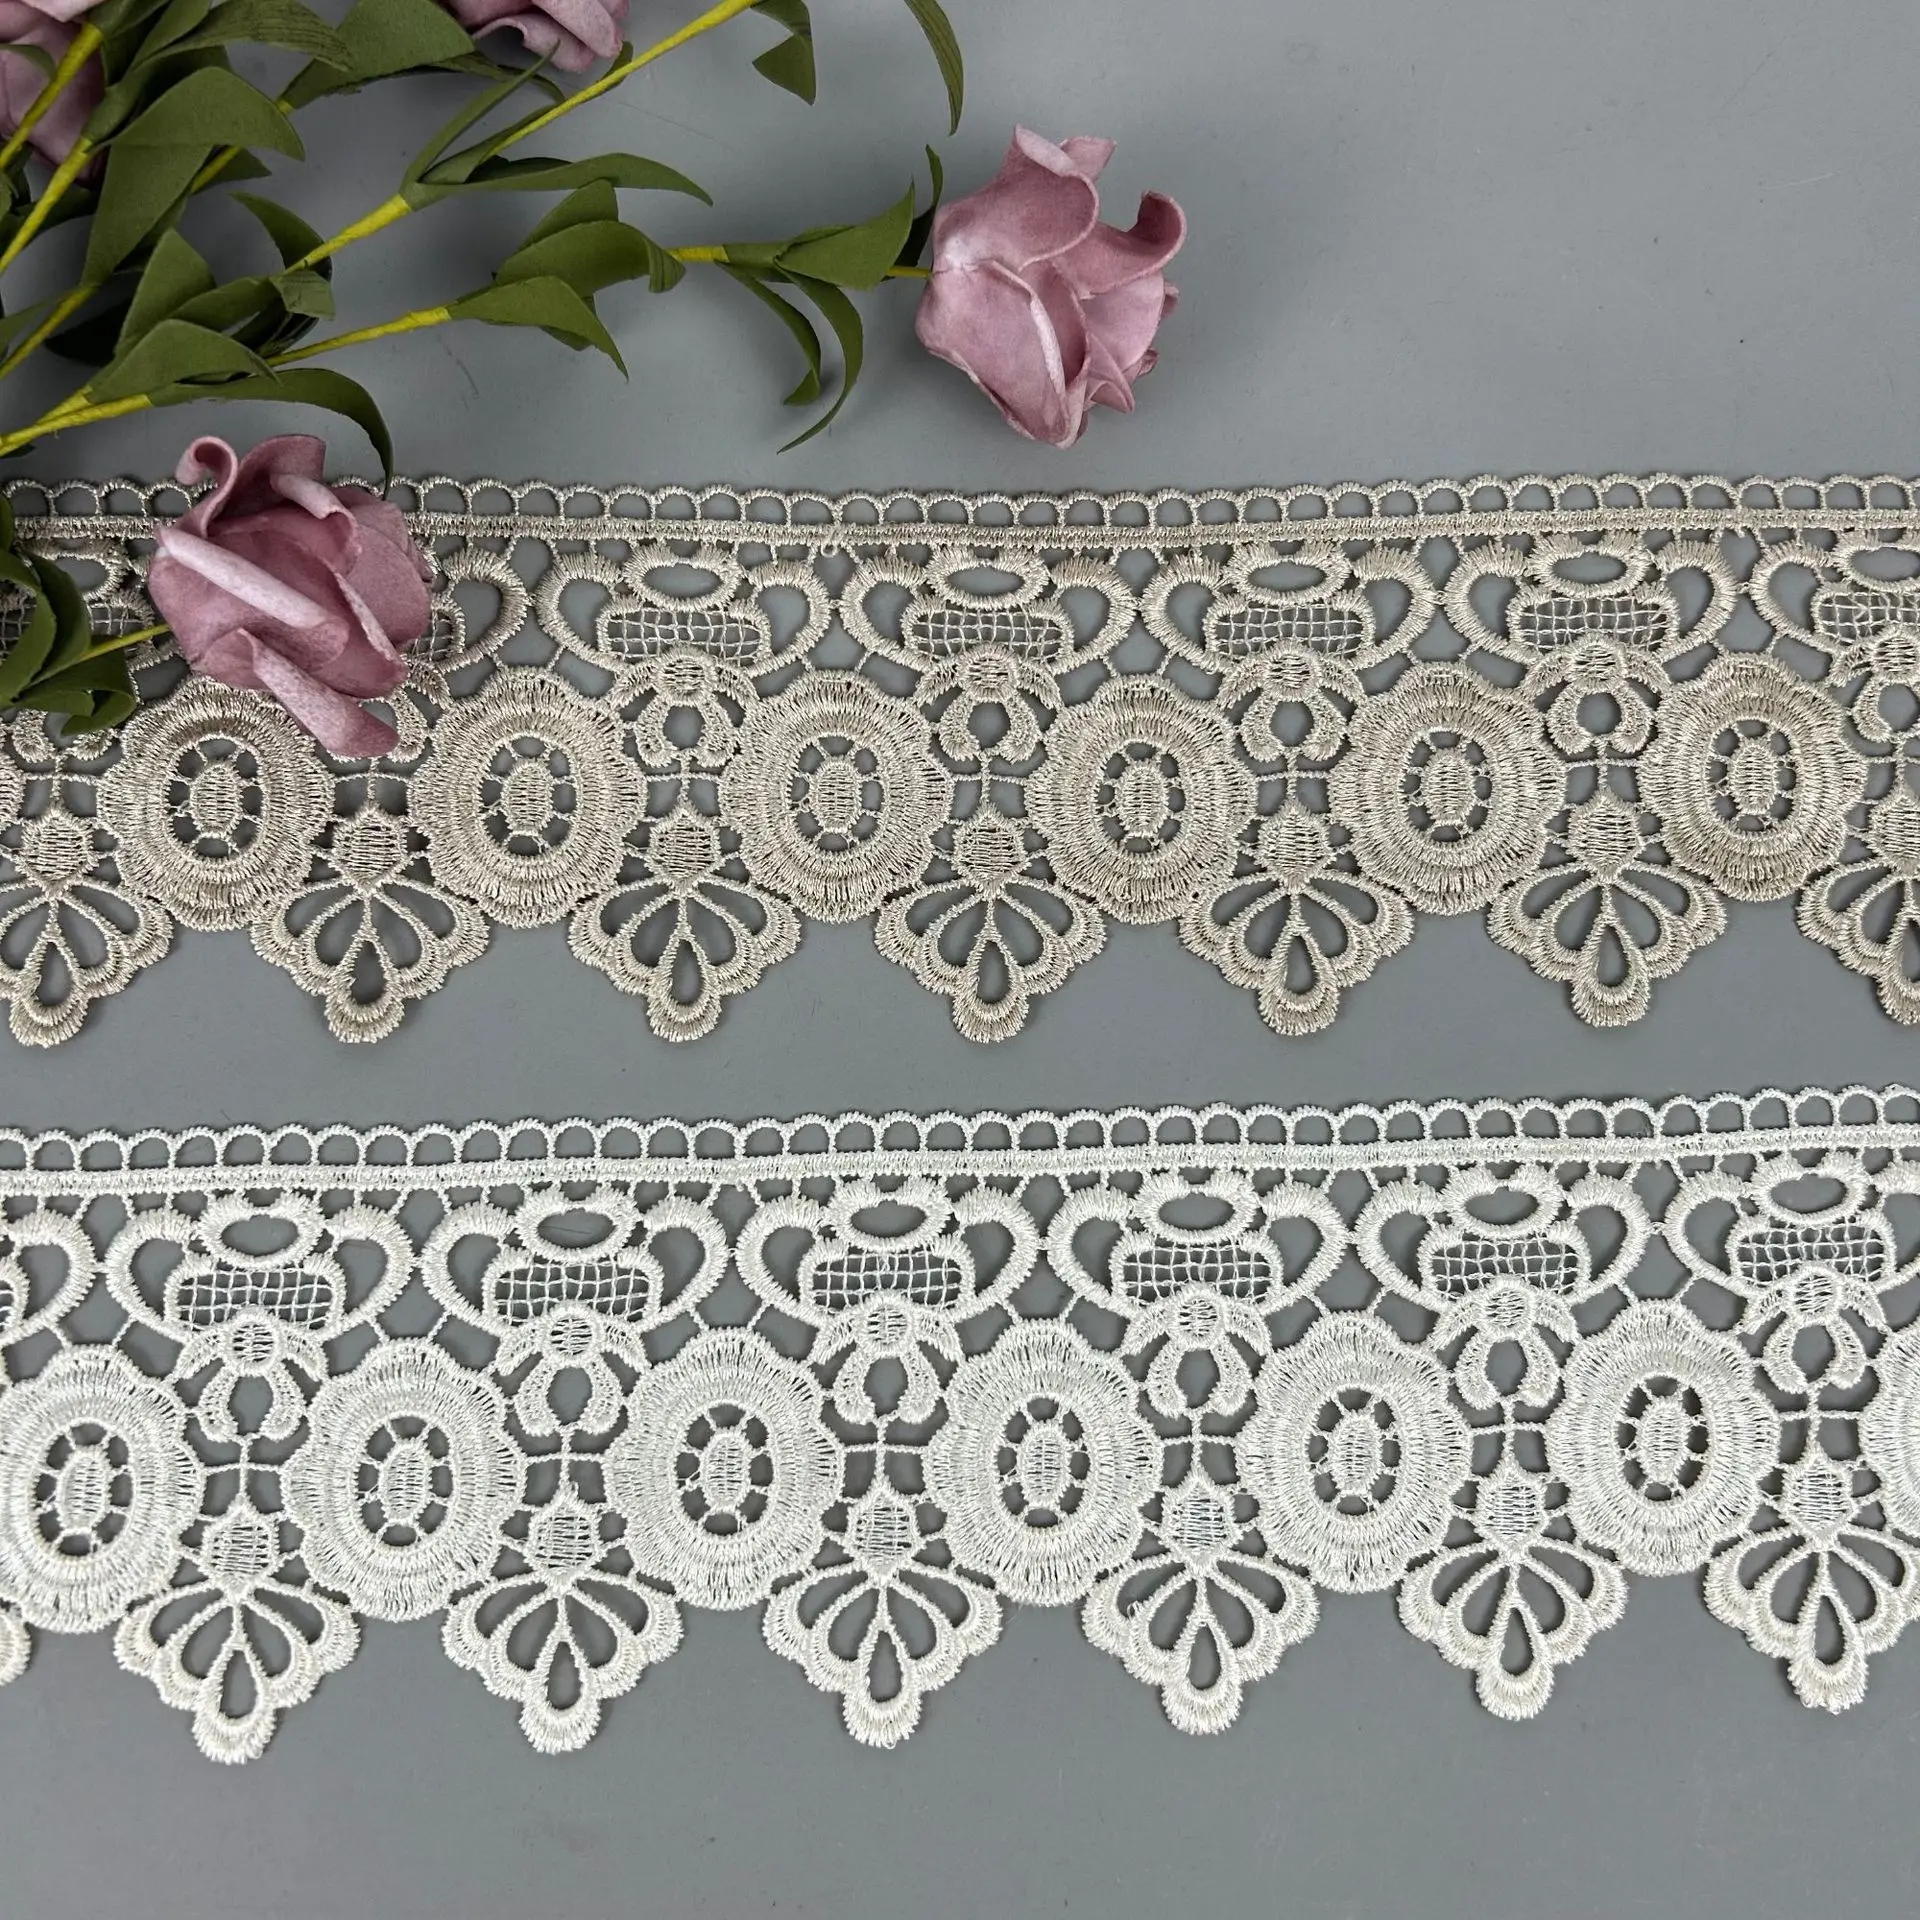 Whole sale thailand african market patterned embroidery lace trim eyelet fabric 100% cotton